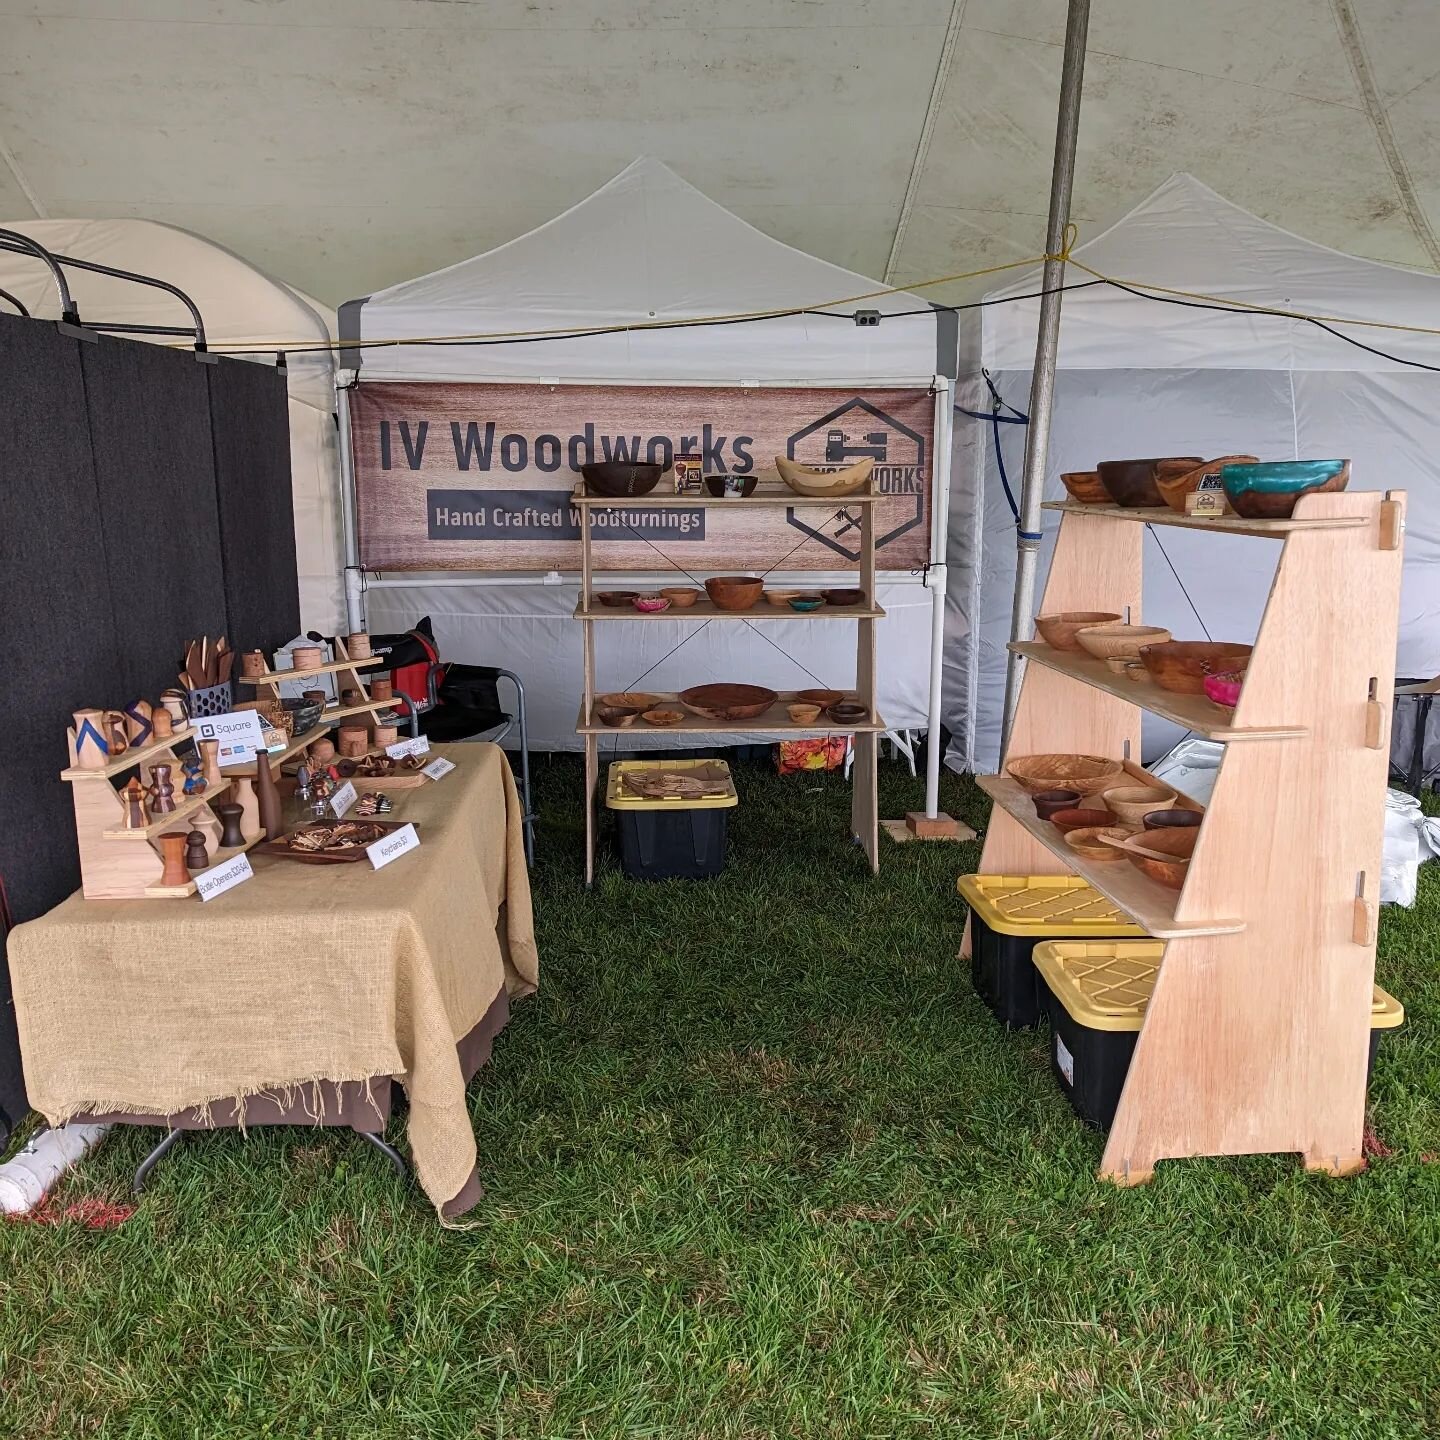 Tyler Park Crafts in the Meadow

Come on out and say hi. Weather is holding out and it looks like a gorgeous day with some awesome vendors including @angrynimbuswoodcraft and @betterhalfartisticdesigns